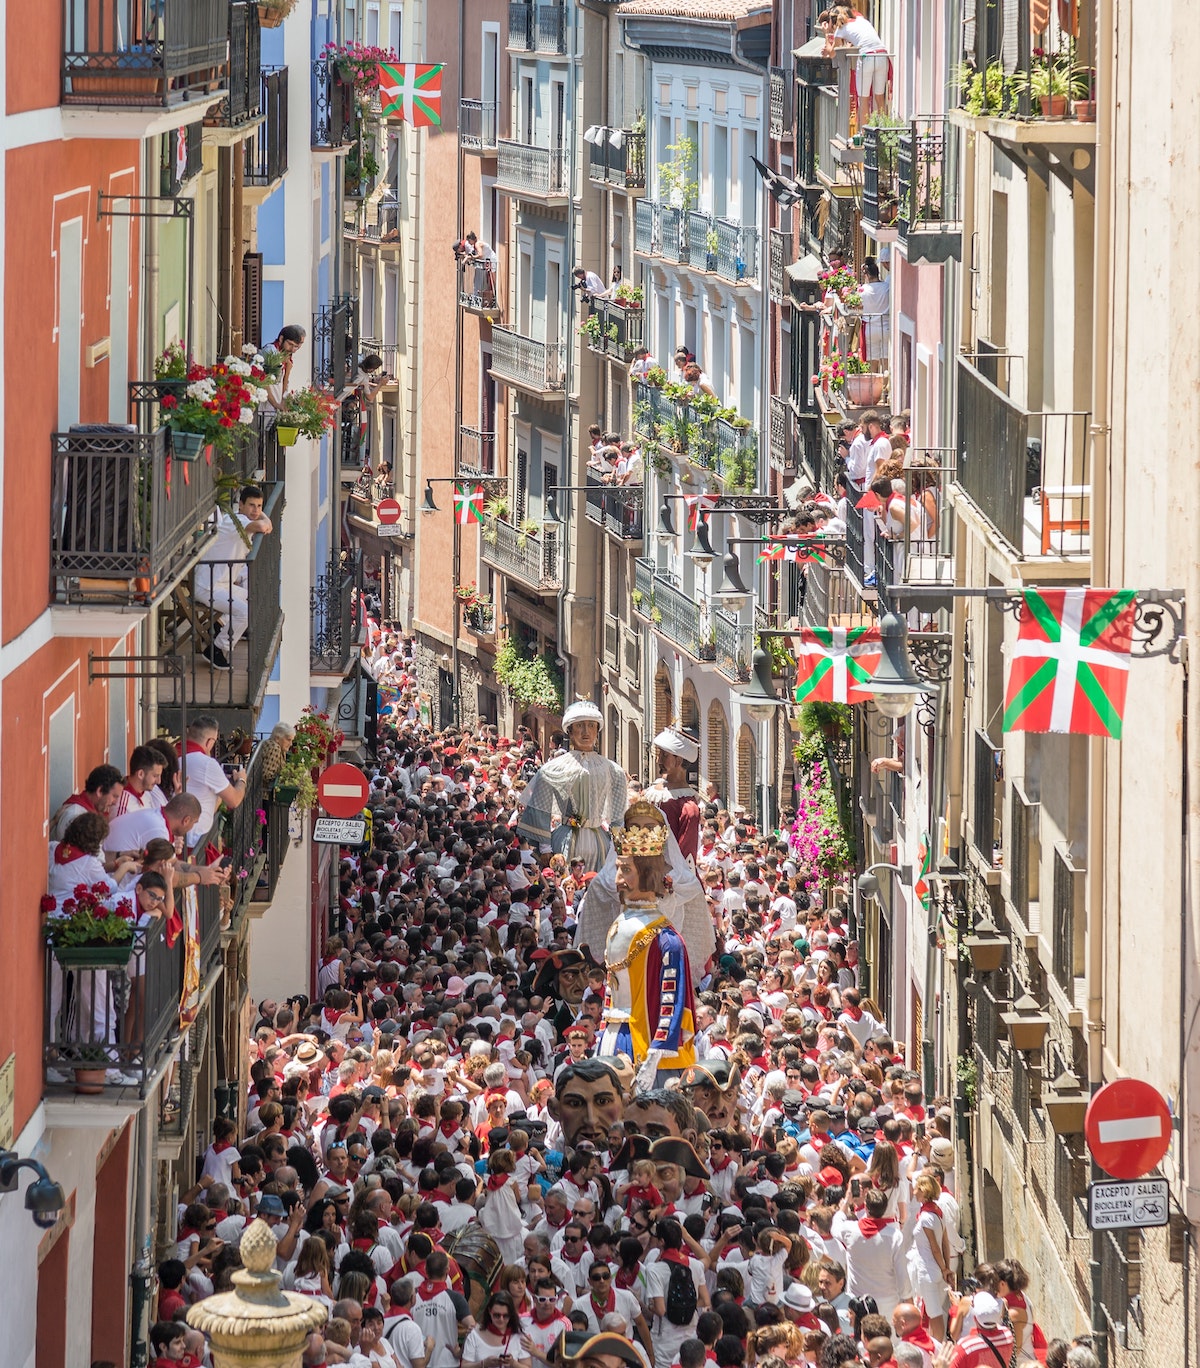 Large figurines being paraded through a crowded city street in Spain while people watch from their balconies.